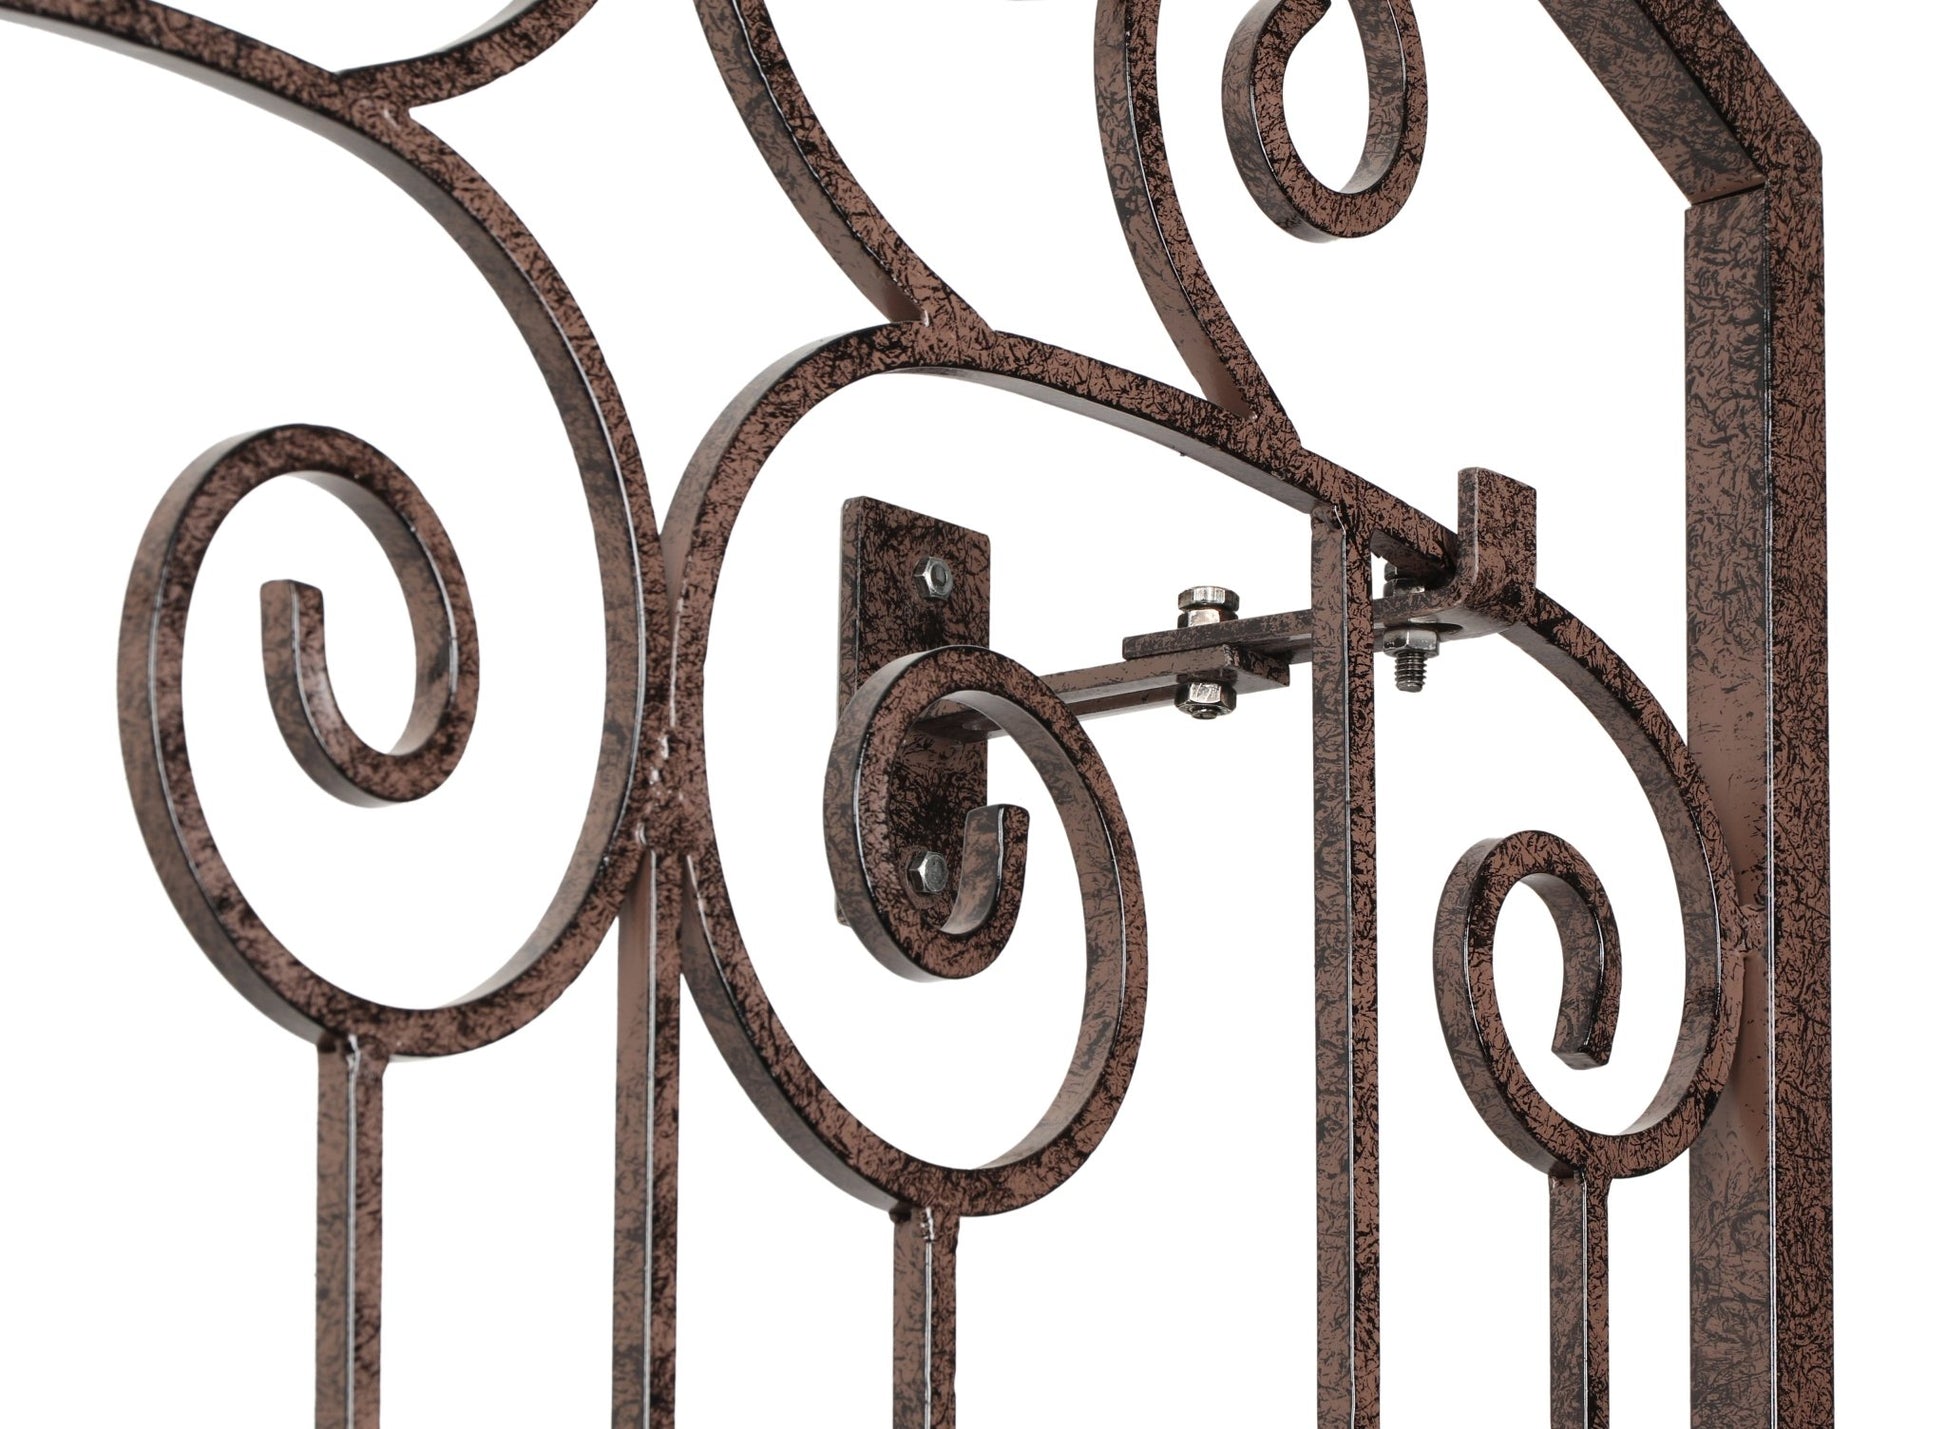 8 Foot Wrought Iron Garden Trellis Metal Wall Screen with Wall Mounting Brackets - H Potter